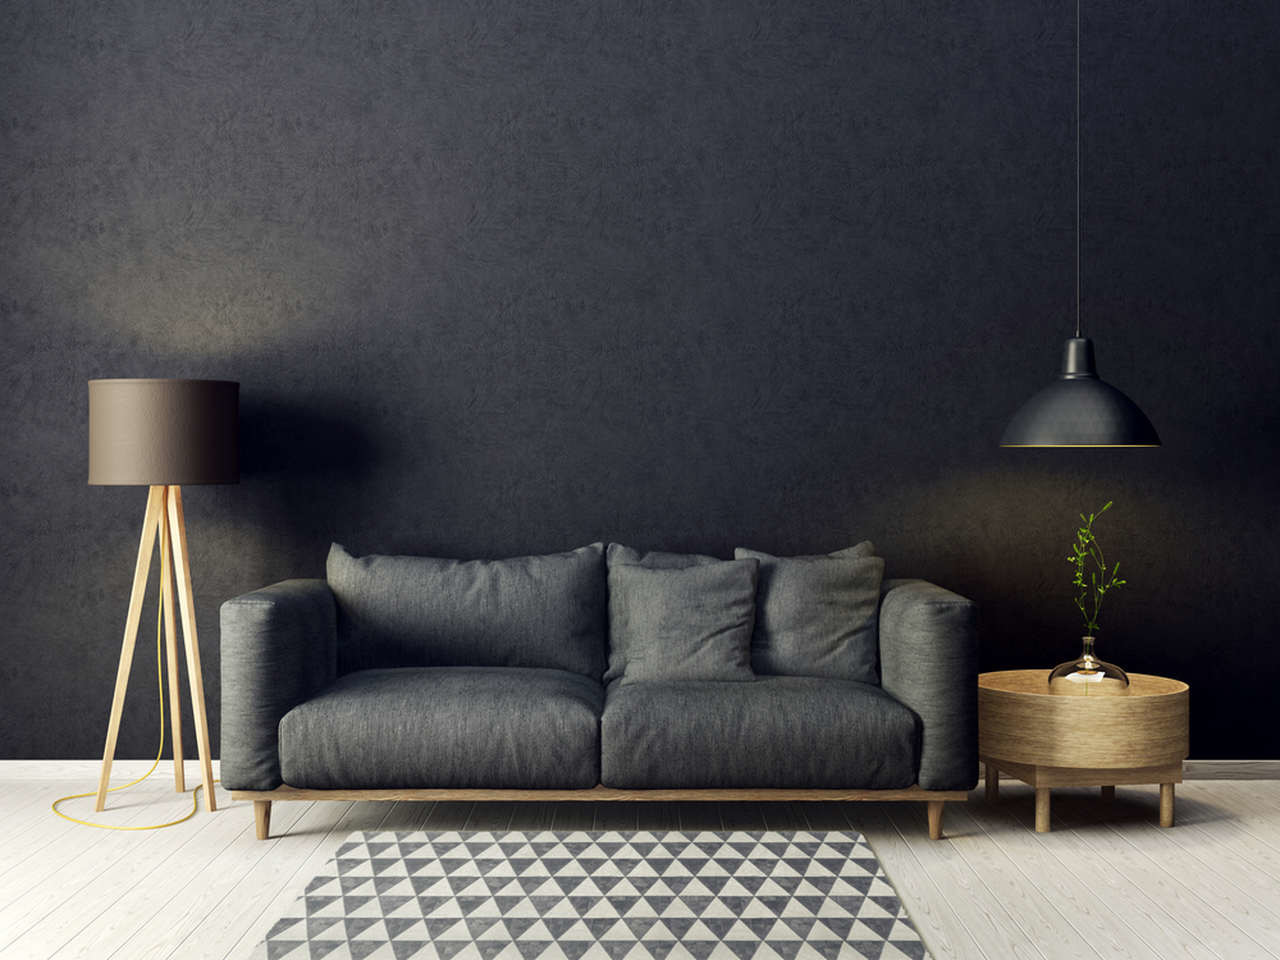 3 Black Home Decor Ideas That You Will Love